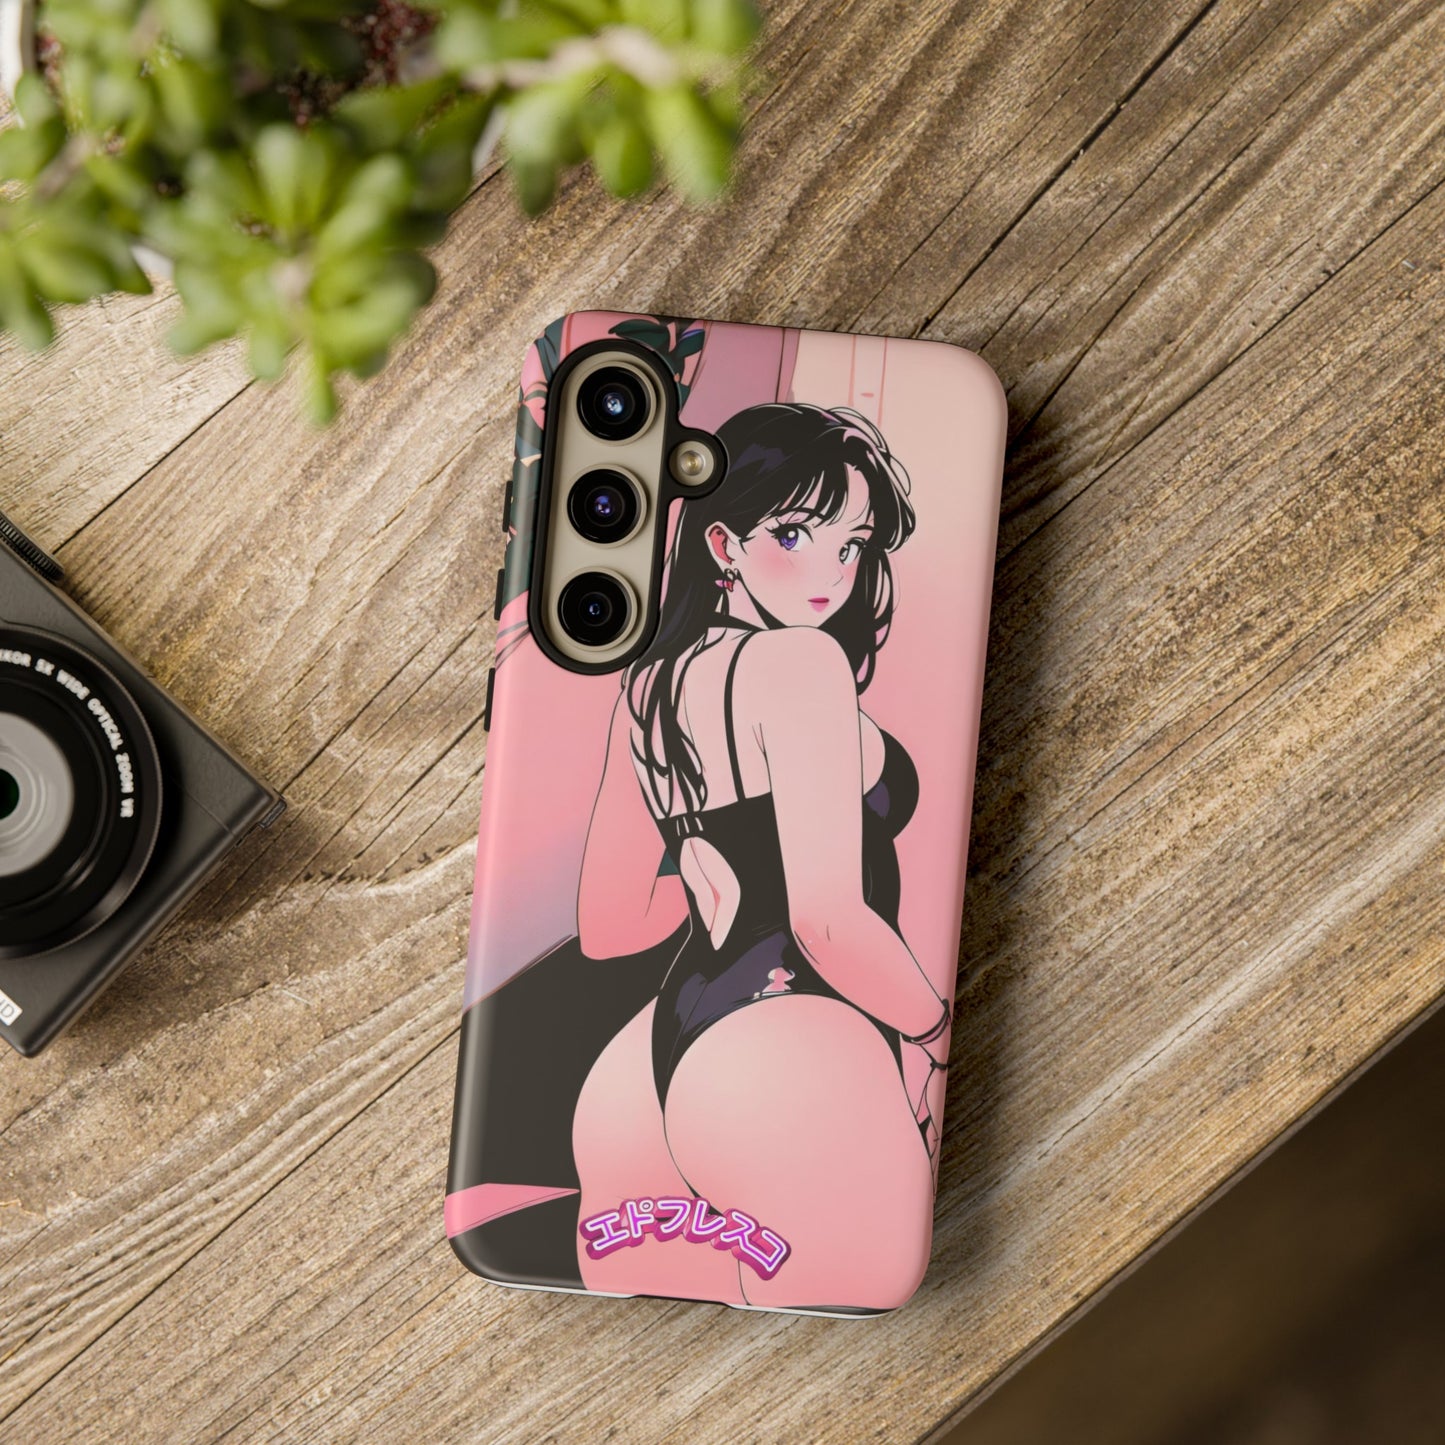 Anime Style Art Tough Cases- "Pink Party"